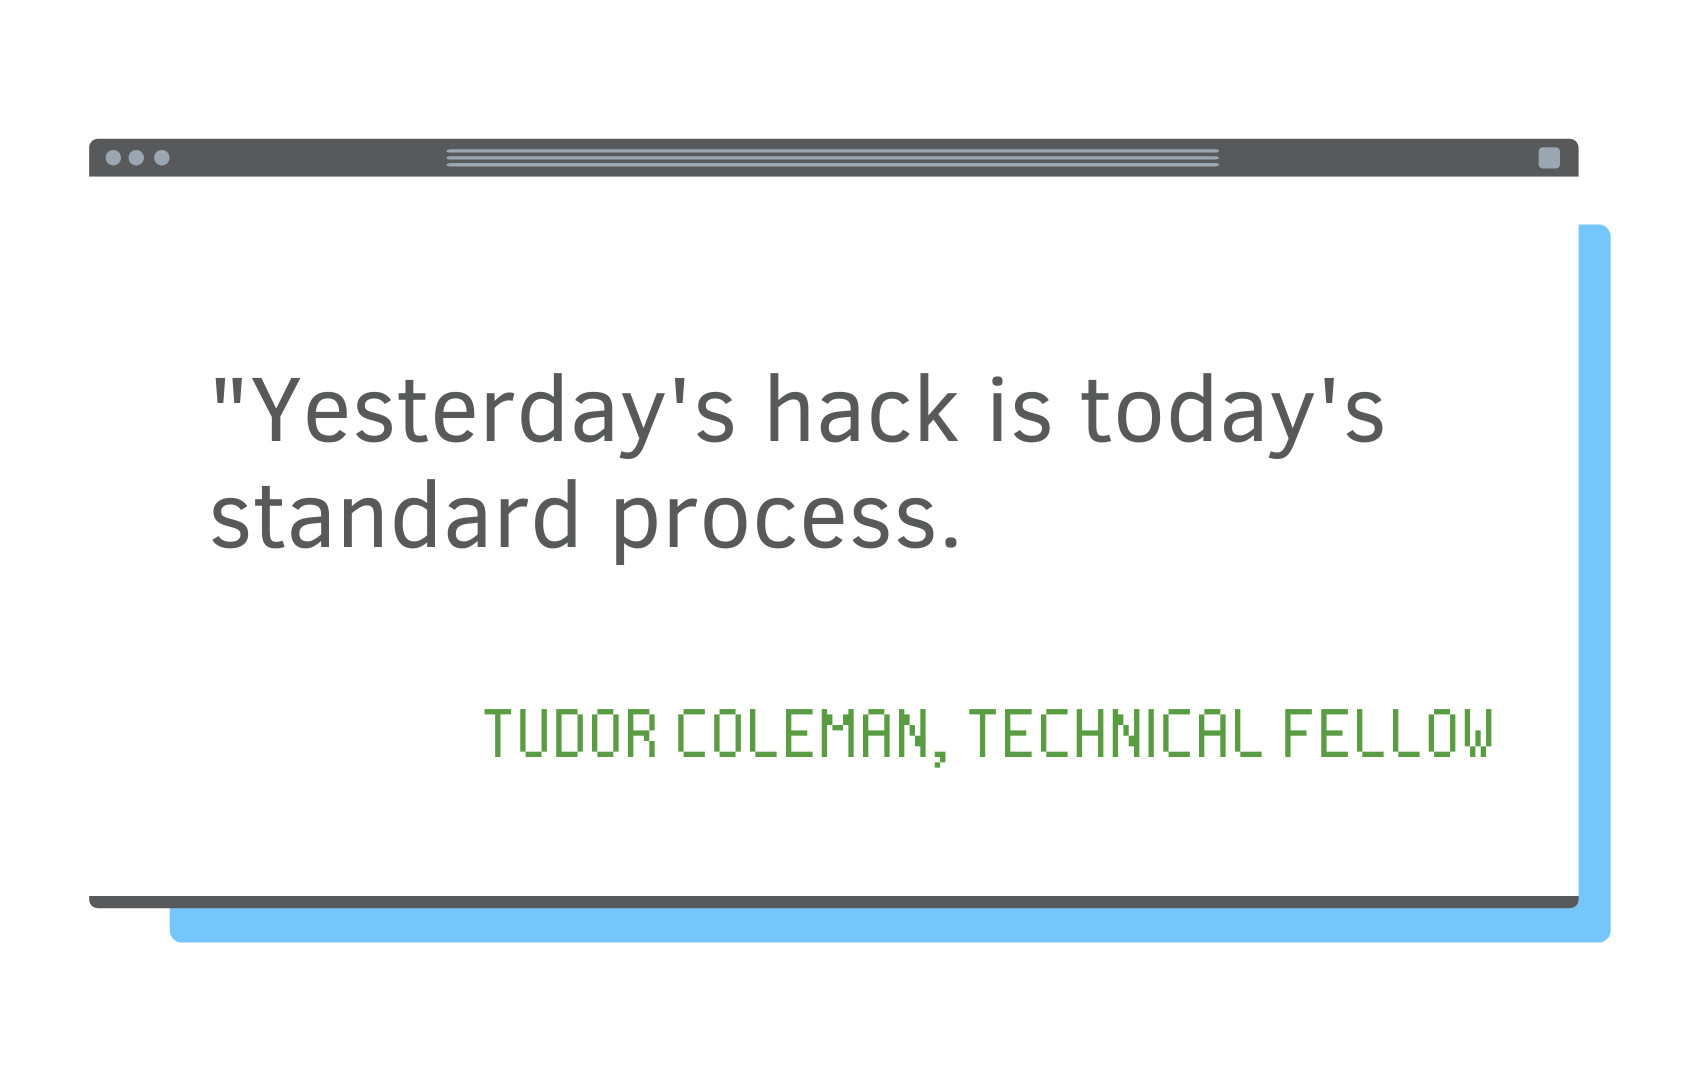 quote from Tudor Coleman